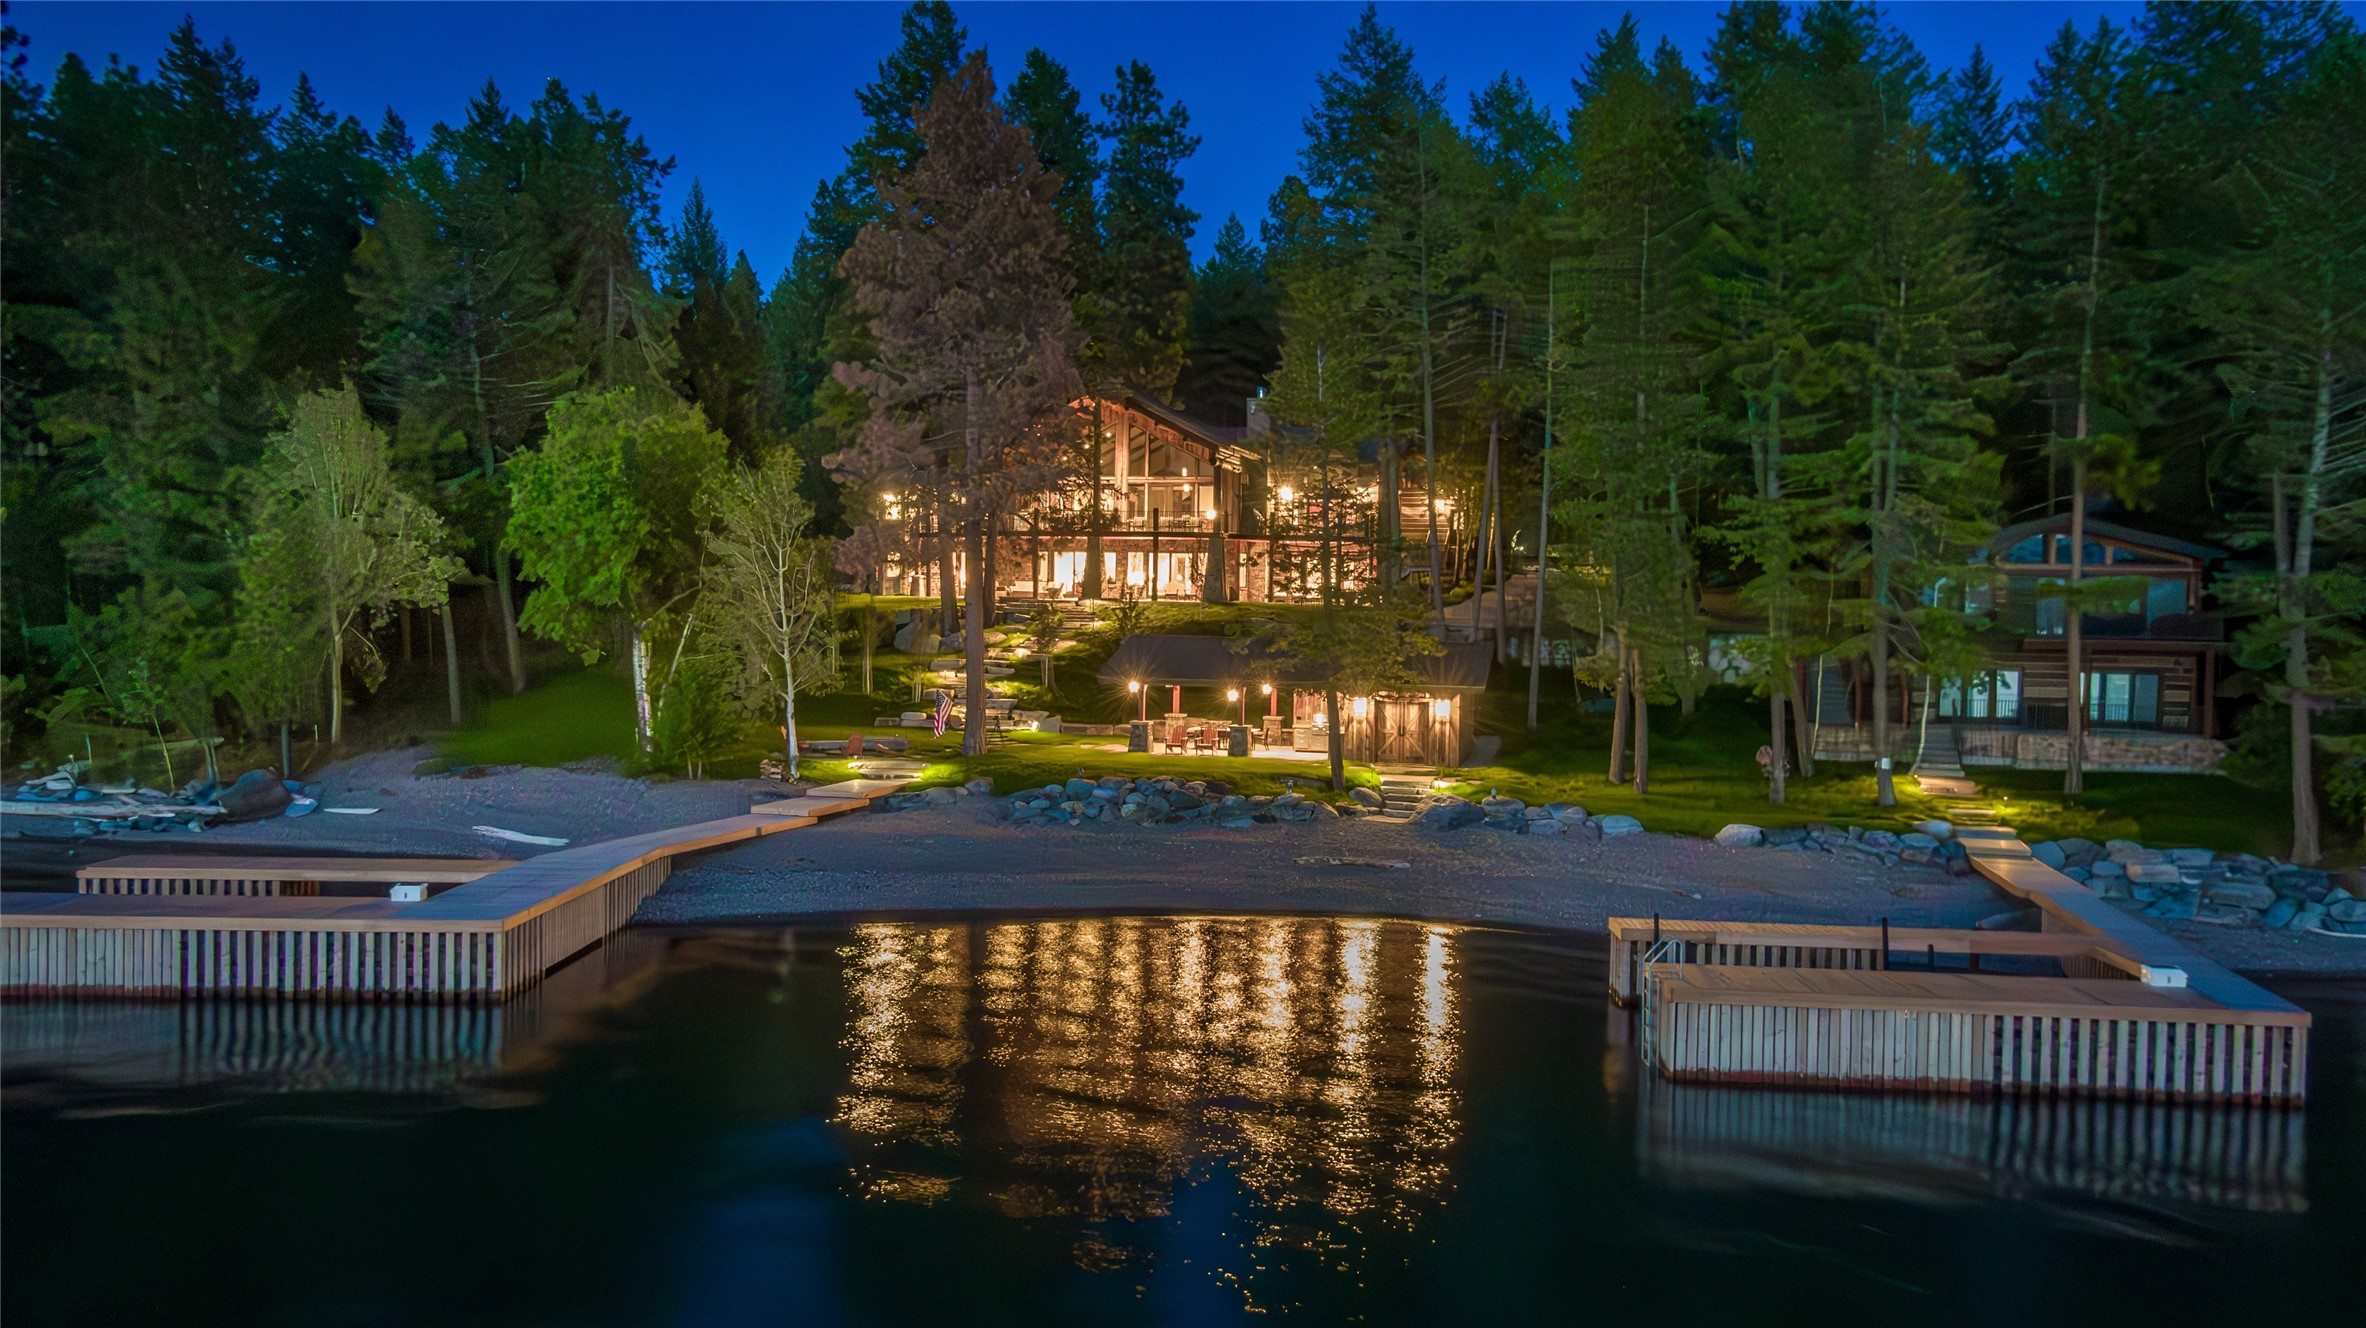 Indulge in the enchanting allure of this extraordinary property, gracing the shores of Flathead Lake with a remarkable 208 feet of prime waterfront. Situated just minutes away from the charming Village of Bigfork, this unique estate boasts two extensively remodeled homes, each meticulously crafted to showcase unparalleled attention to detail, each home on their own tract of land. Upon entering the main home, the expansive main floor reveals an awe-inspiring view of Flathead Lake that treats you to its legendary sunsets. The living room captivates with a majestic rock fireplace and lofty exposed beams, seamlessly transitioning to a sprawling covered deck where panoramic views become your daily backdrop. The kitchen stands as a masterpiece of design, adorned with custom cabinetry and a stunning wall of storage, creating a haven for culinary enthusiasts and making entertaining a true delight. The main floor bedroom suite offers a retreat of luxury, featuring separate walk-in closets, dual vanities, a spacious tile shower, and a soaking tub strategically positioned to overlook the beautiful landscape and Flathead Lake. For those who value a dedicated workspace, the office/TV room beckons with built-in desks for two, providing a cozy spot for fireside relaxation and convenient access outside through patio doors. A generously sized laundry/storage room effortlessly connects to the 3-stall garage and additional storage space. The lower level of the home unfolds into an expansive entertainment area, characterized by high ceilings, another inviting fireplace, and a convenient wet bar. Double doors lead to the outdoor patio, a perfect setting for gatherings, creating a seamless transition between indoor and outdoor living. This property transcends the definition of a home; it is a gateway to lakeside living at its finest, incredible landscaping with large stone stairs to the waters edge. Also boasting spacious guest house and at the lake level – an outdoor living space complete with kitchen, entertaining and bathroom. Every detail has been thoughtfully curated for your comfort and enjoyment, offering an unparalleled opportunity to savor the beauty of Flathead Lake in a setting where luxury and natural splendor harmoniously coexist.  Main home has a total of 7 bedrooms, non-conforming, septic is built for 3 bedrooms; guest house can sleep 8, septic is built for 2 bedrooms.  Sellers are 2 with occasional guests.  Welcome to a residence where each moment is an invitation to embrace the art of. For your private showing call Cherie T. Hansen 406-253-4546 or your real estate professional.